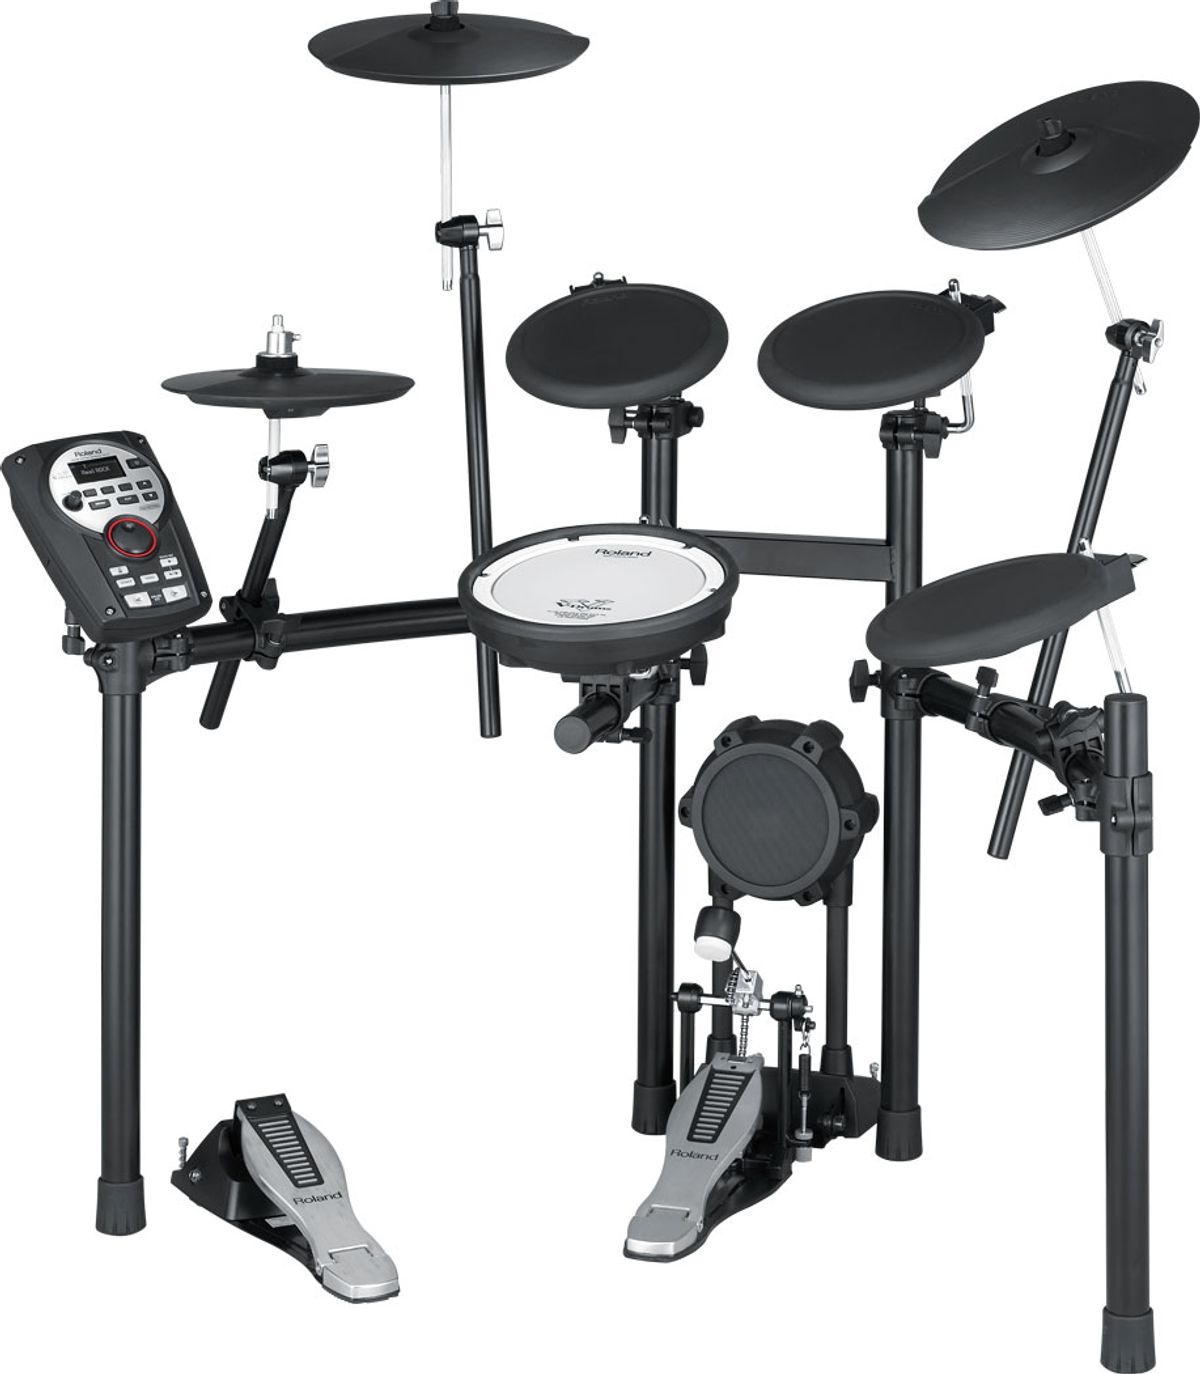 FREE Headphones, Throne, Sticks, Kick Pedal, Hi-Hat Stand, etc (worth up to RM1000) with purchase of selected Roland TD-series Digital Drums